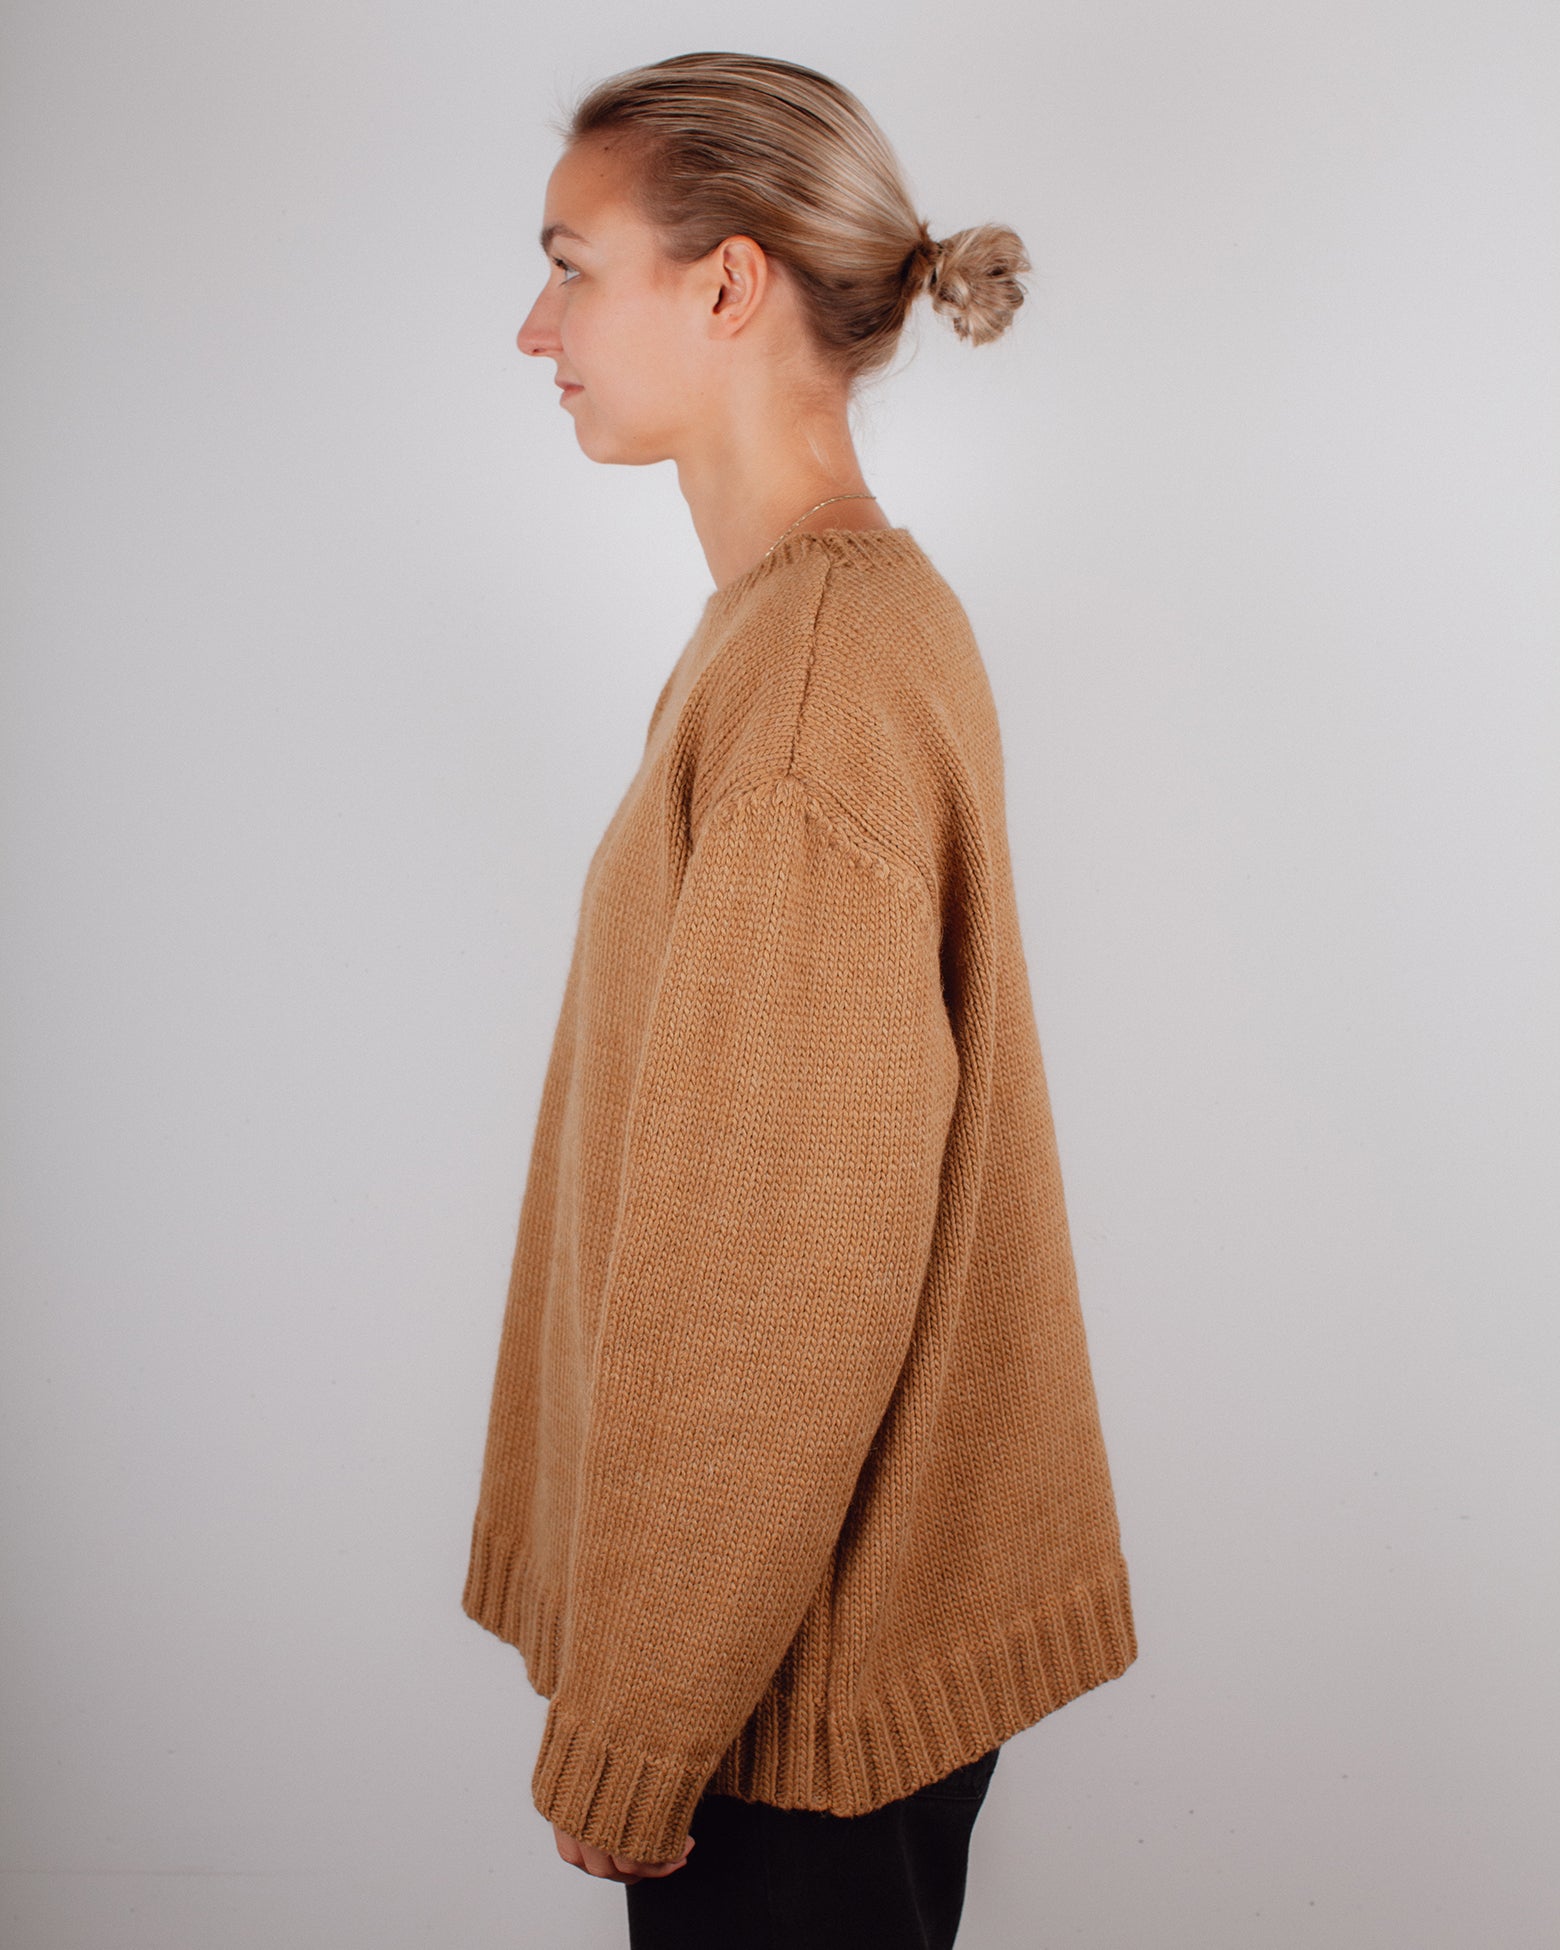 The Sweater Camel